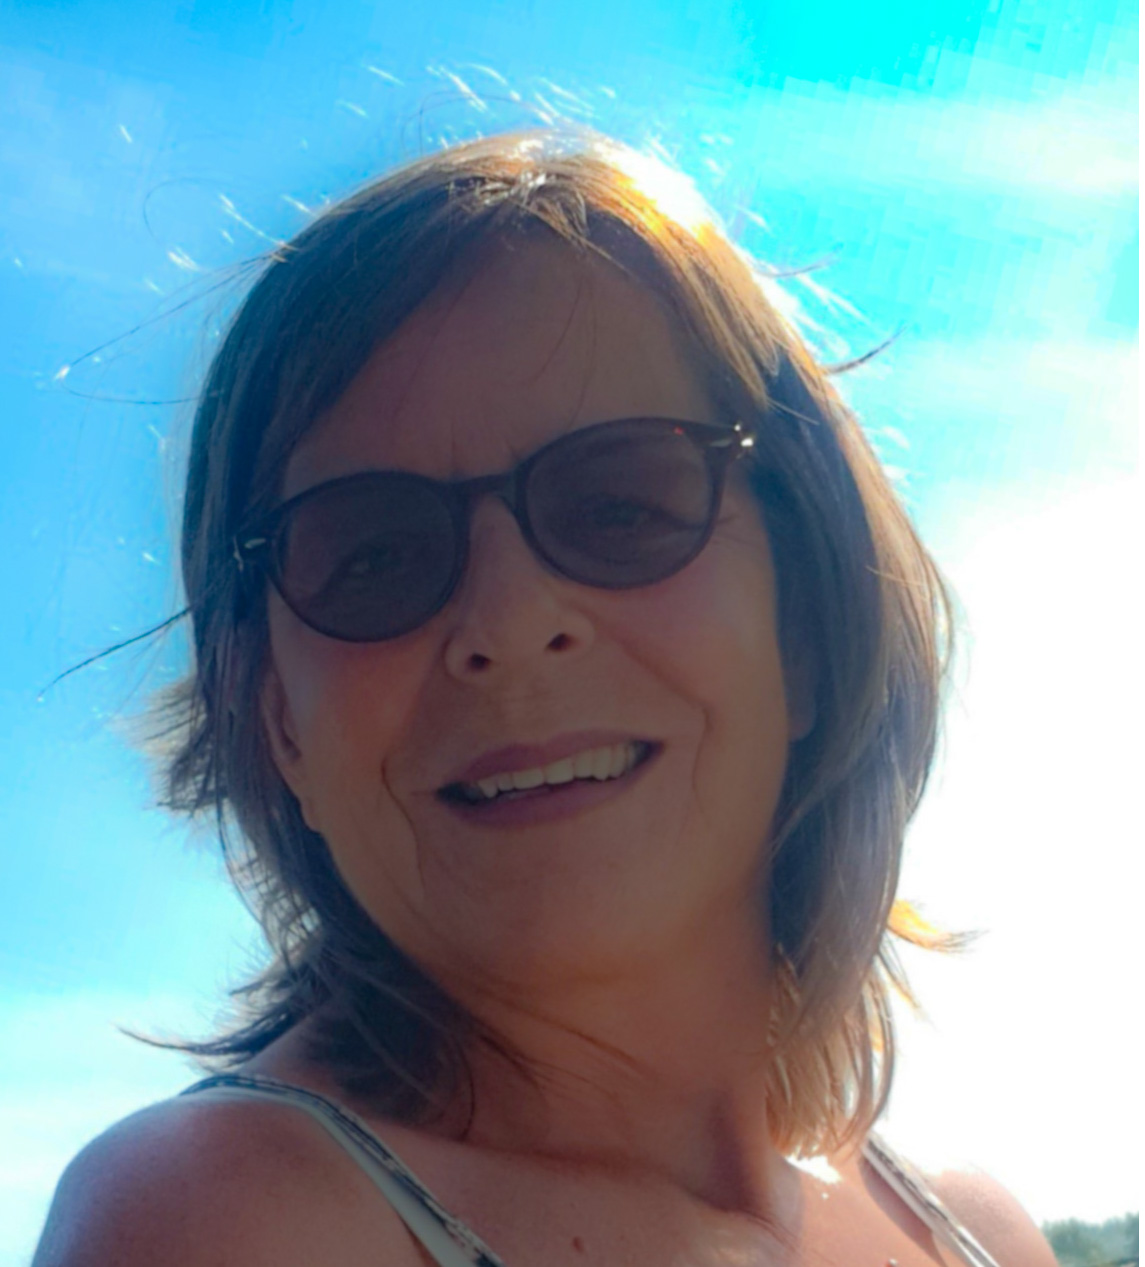 Britta Marreiros, more than 20 years experience in Residential Property Services include Sales, Lettings, and full Property Management in the Algarve, Portugal